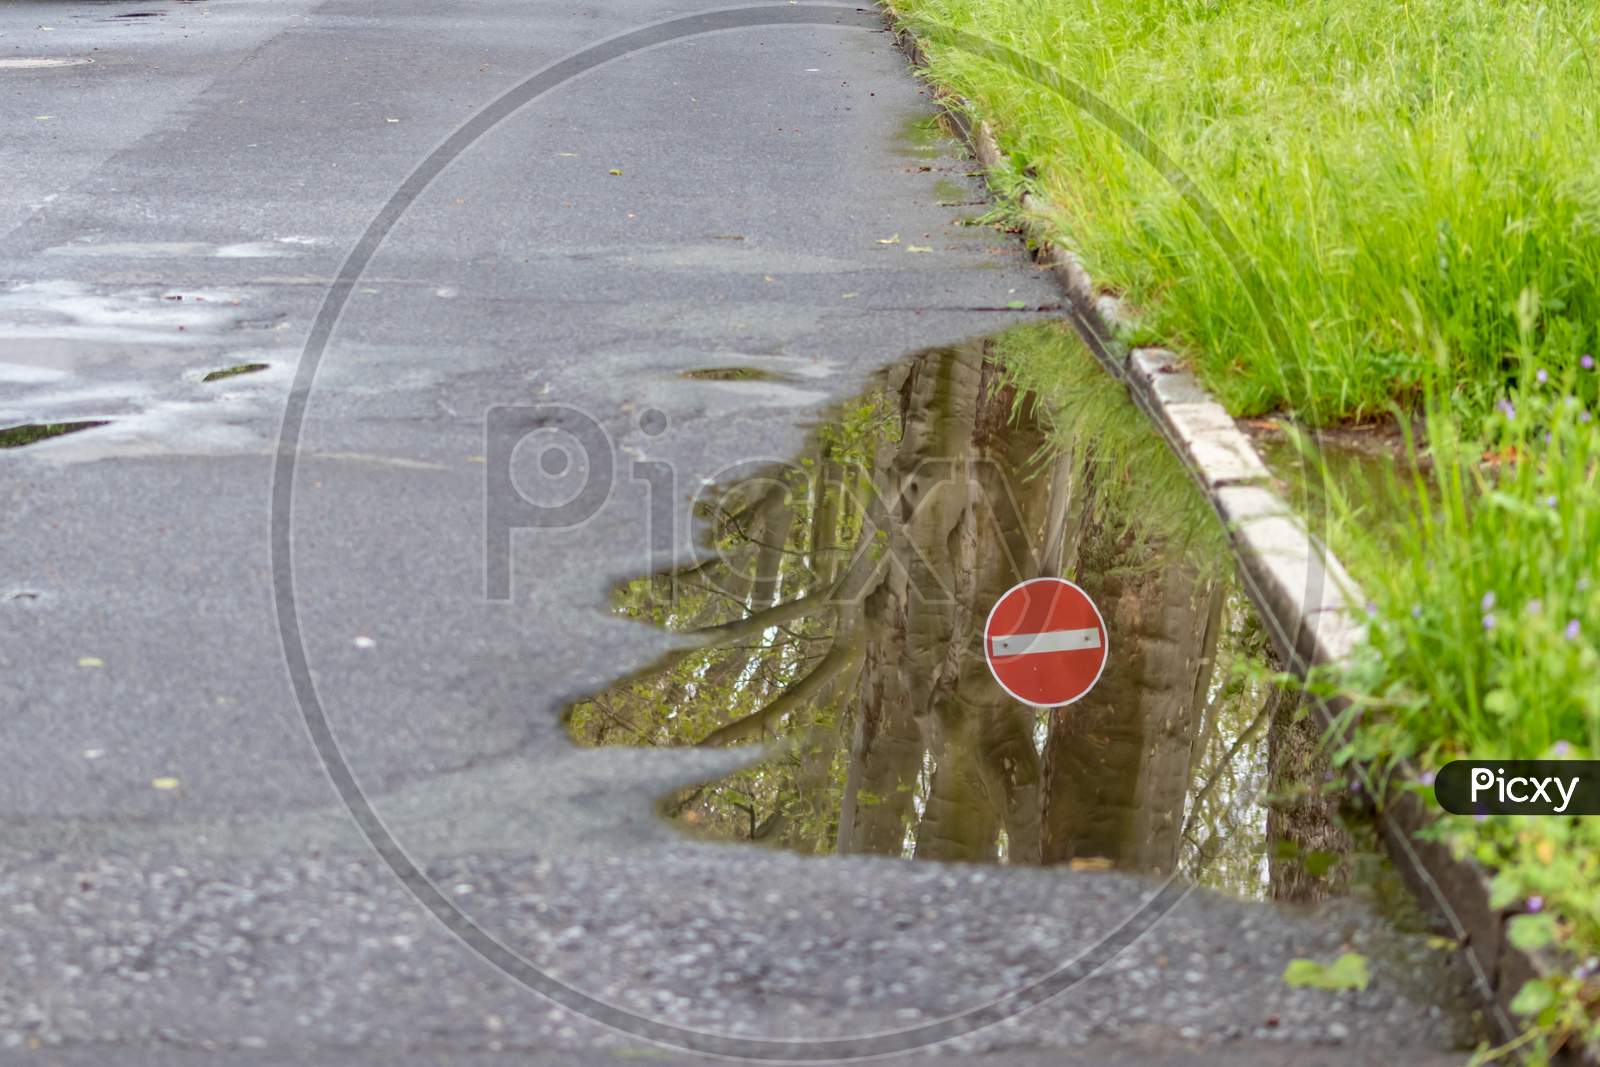 German road sign for one way and forbidden direction as restriction and prohibition for cars and road traffic as nice reflection on the water surface of a puddle after heavy rain on empty road